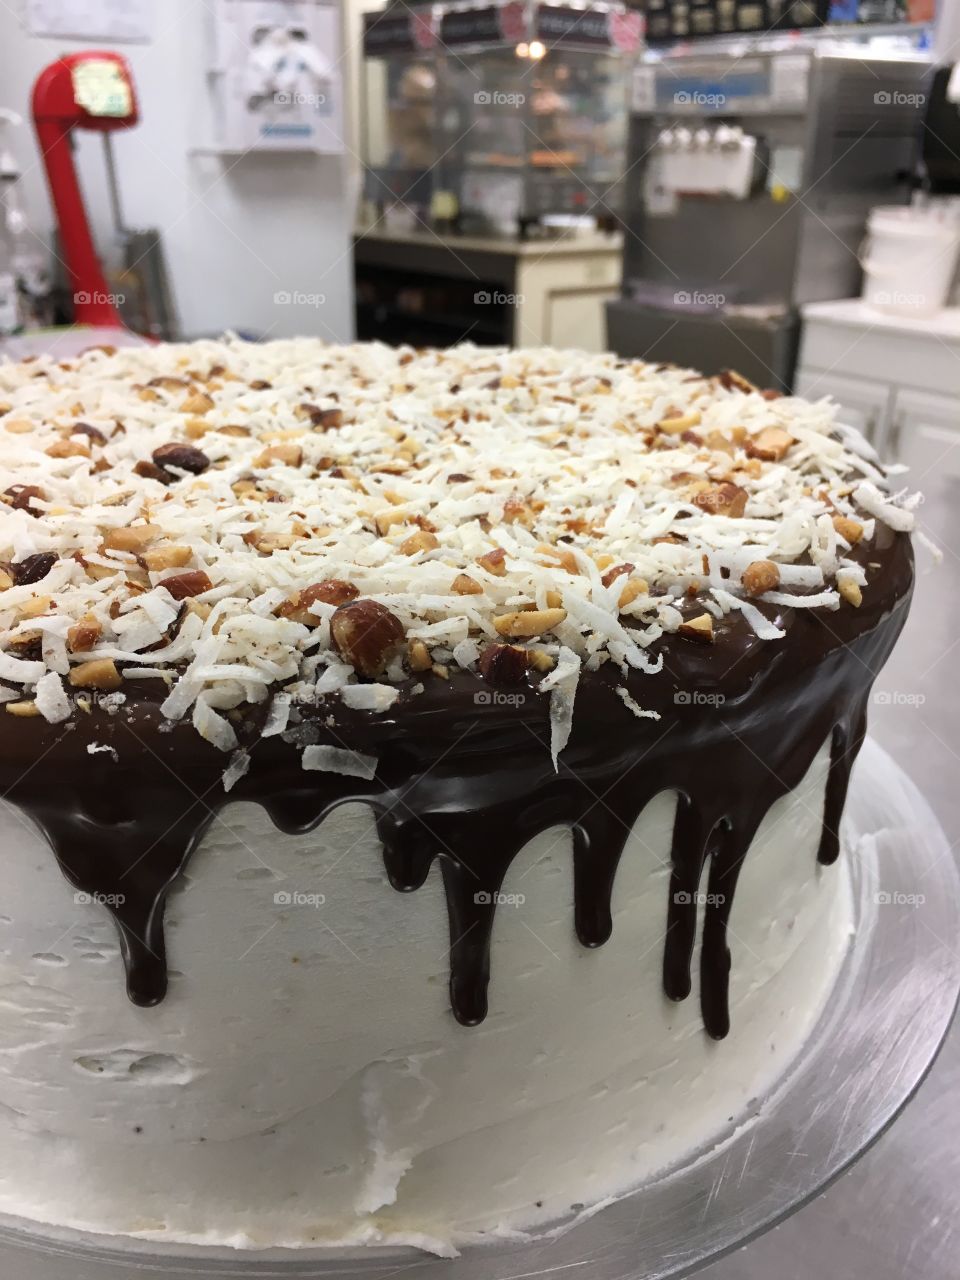 Another take on Almond Joy cake! Chocolate cake, coconut frosting, and chocolate drip topped with crushed almonds and shredded coconut. 